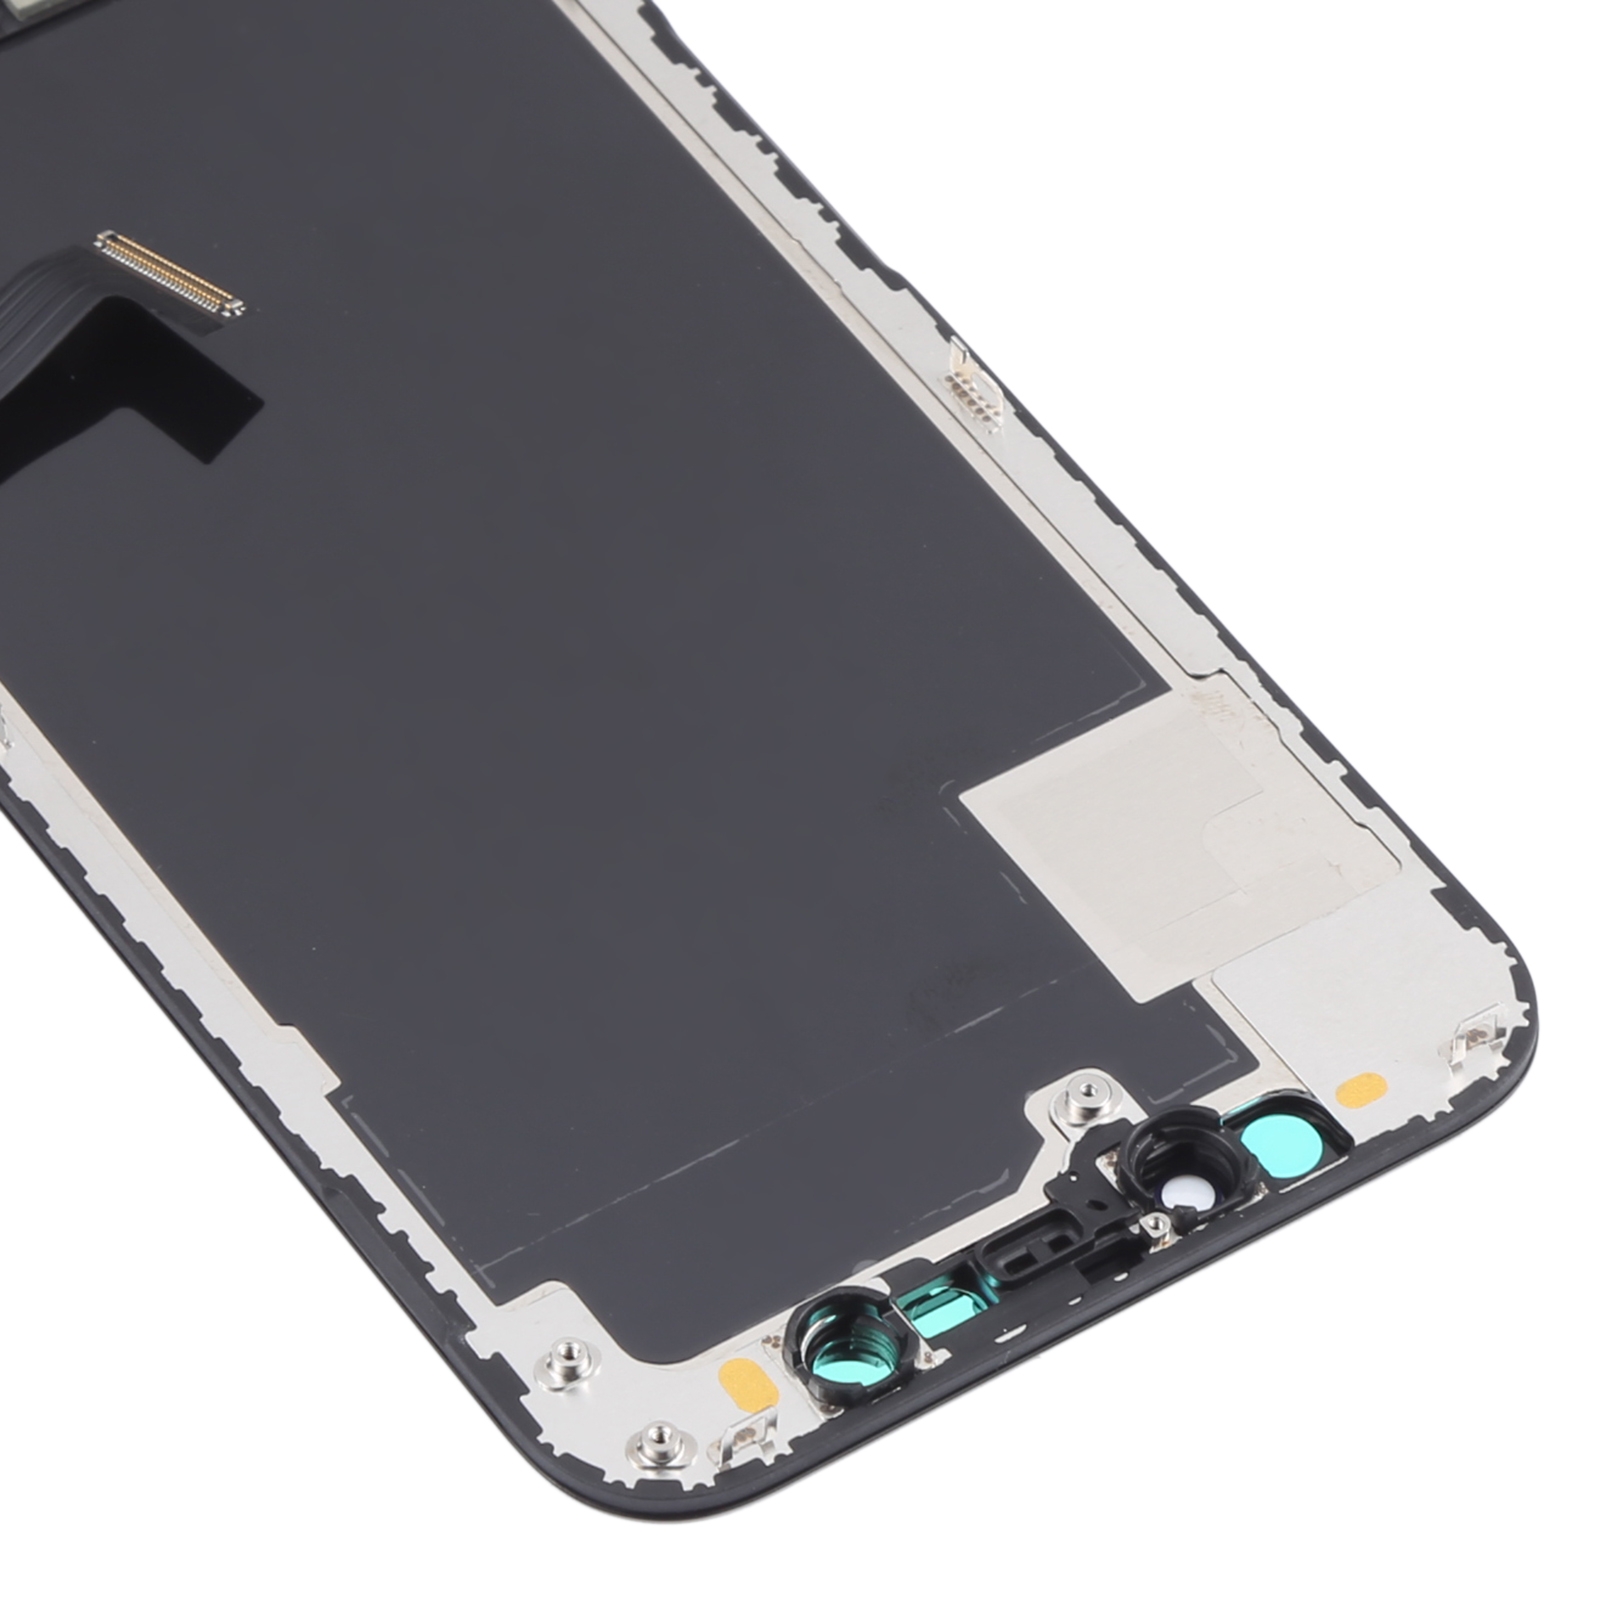 RJ-Incell Screen Replacement for iPhone 12 Mini Black